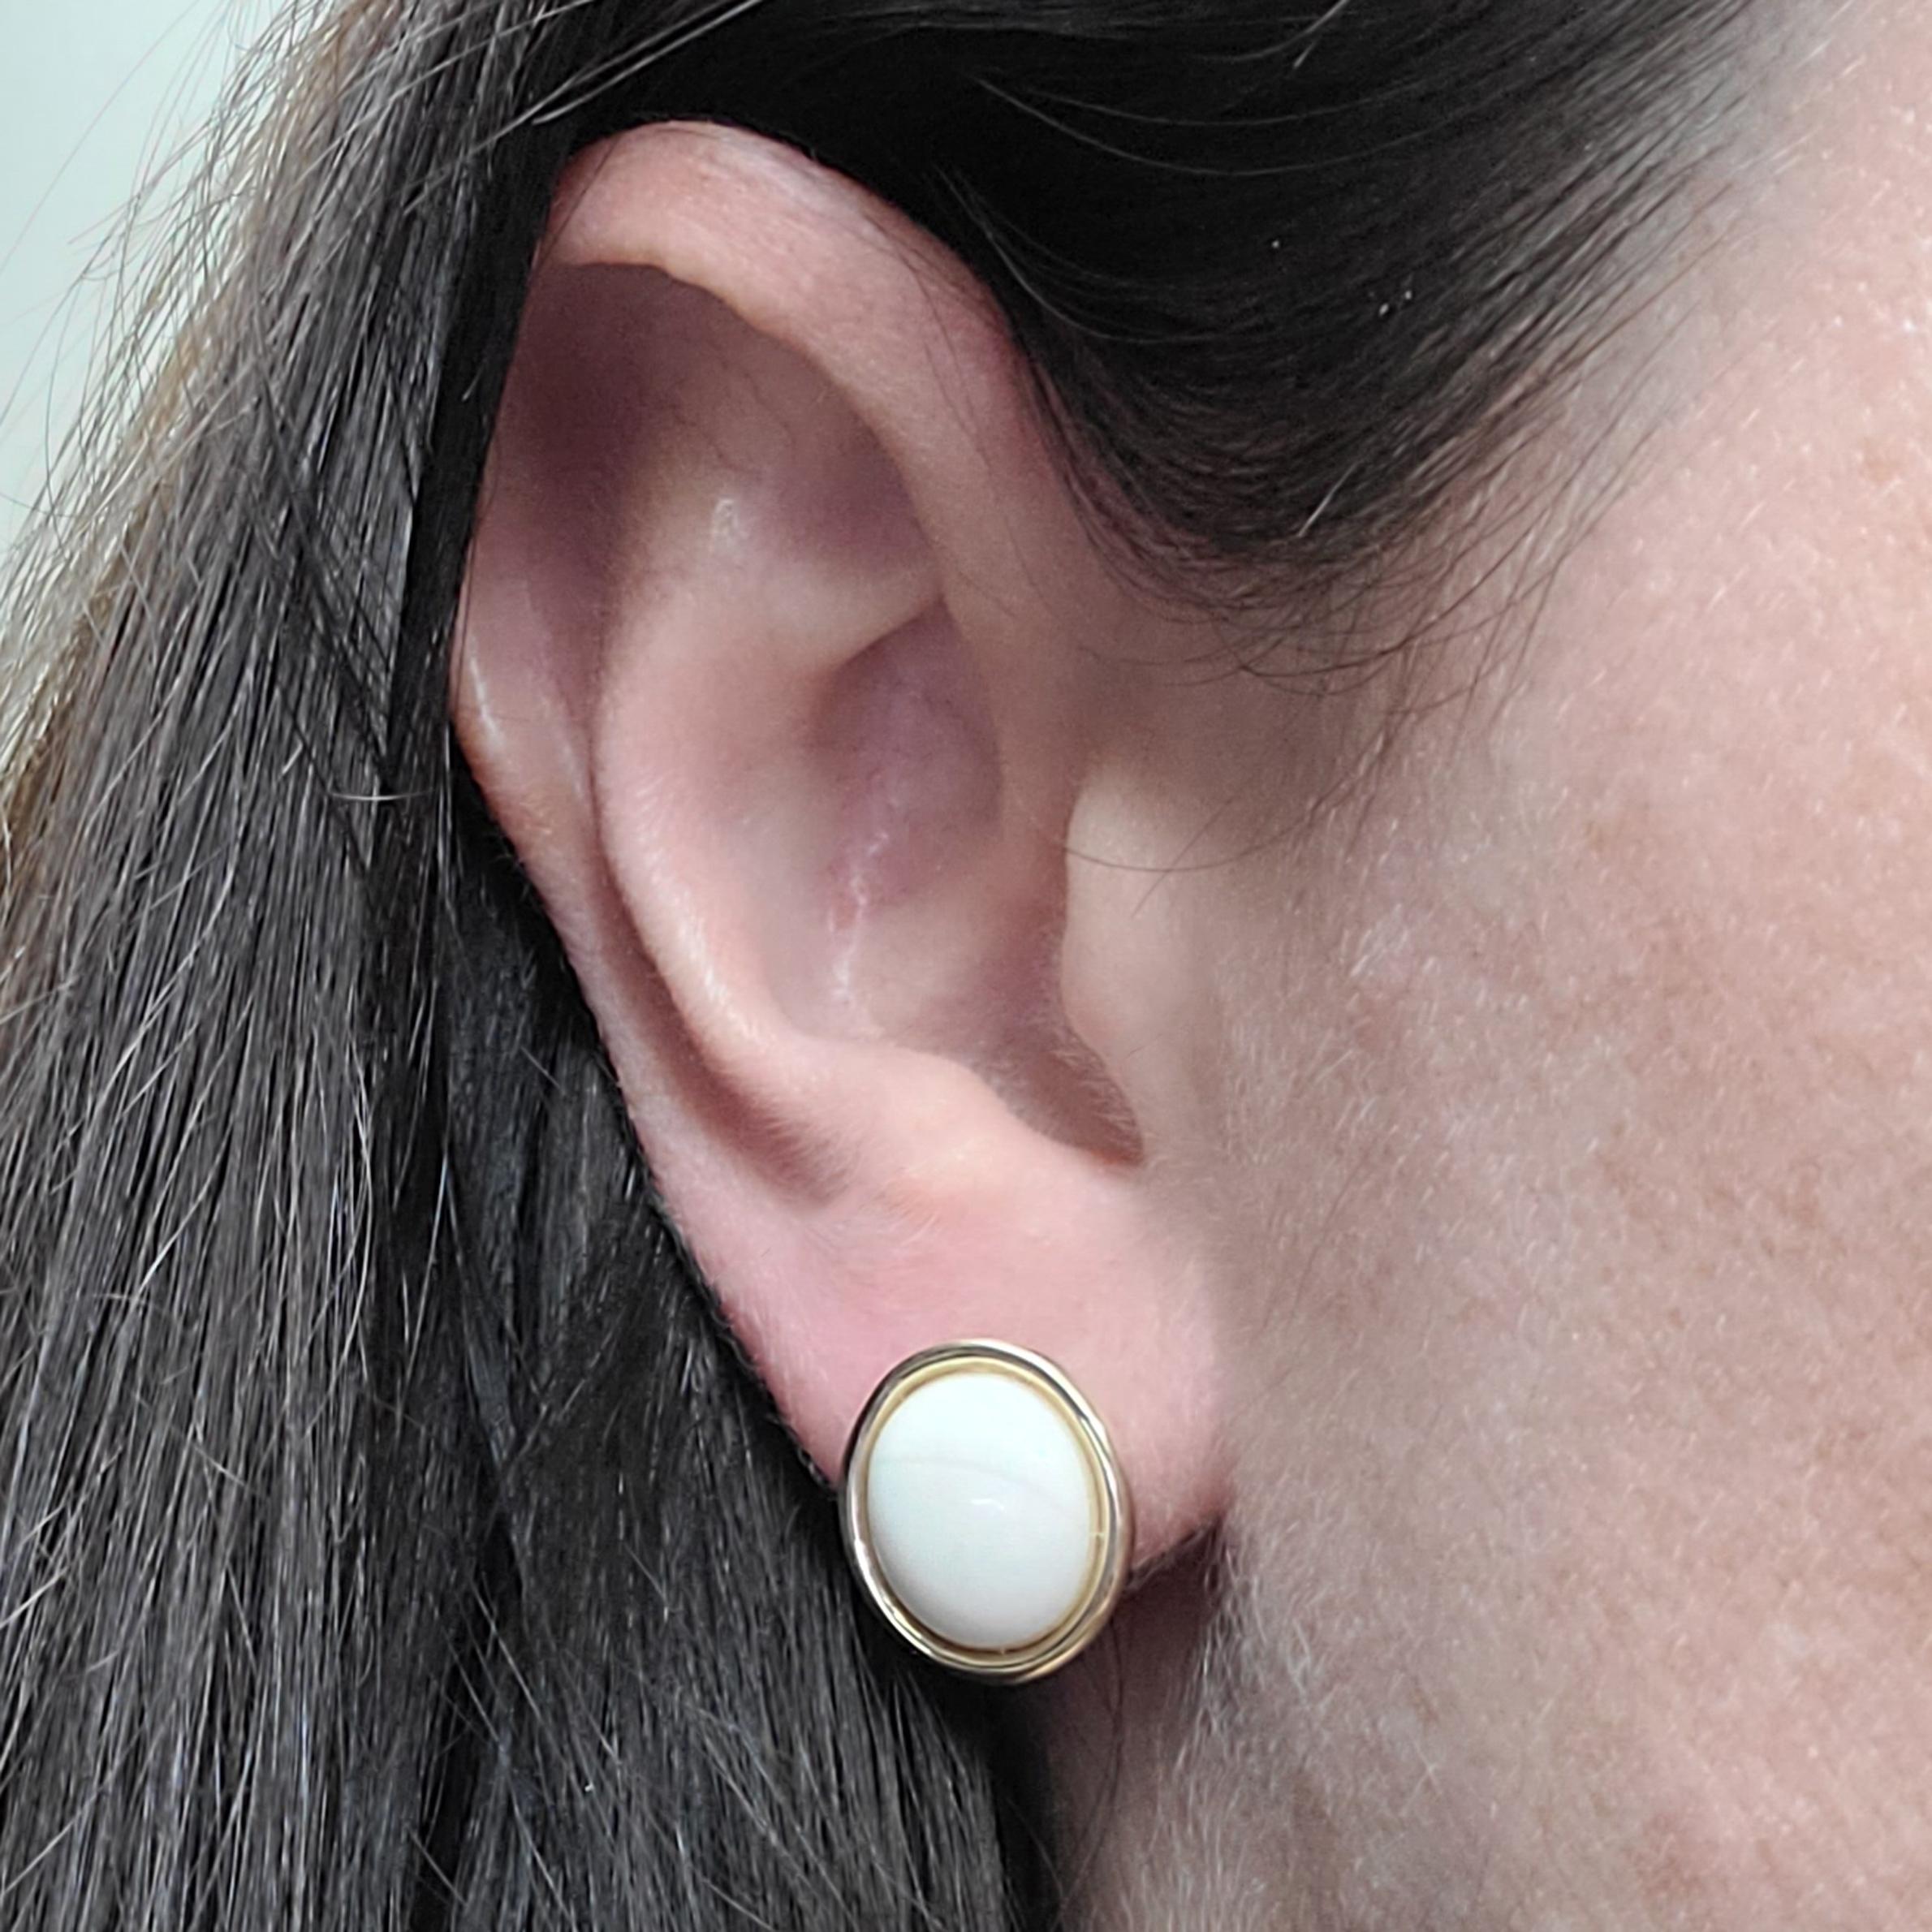 14 Karat Yellow Gold Stud Earrings Featuring Bezel-set Oval White Coral Cabochons. Friction Post with Pushback Nut. Finished Weight is 2.0 Grams.